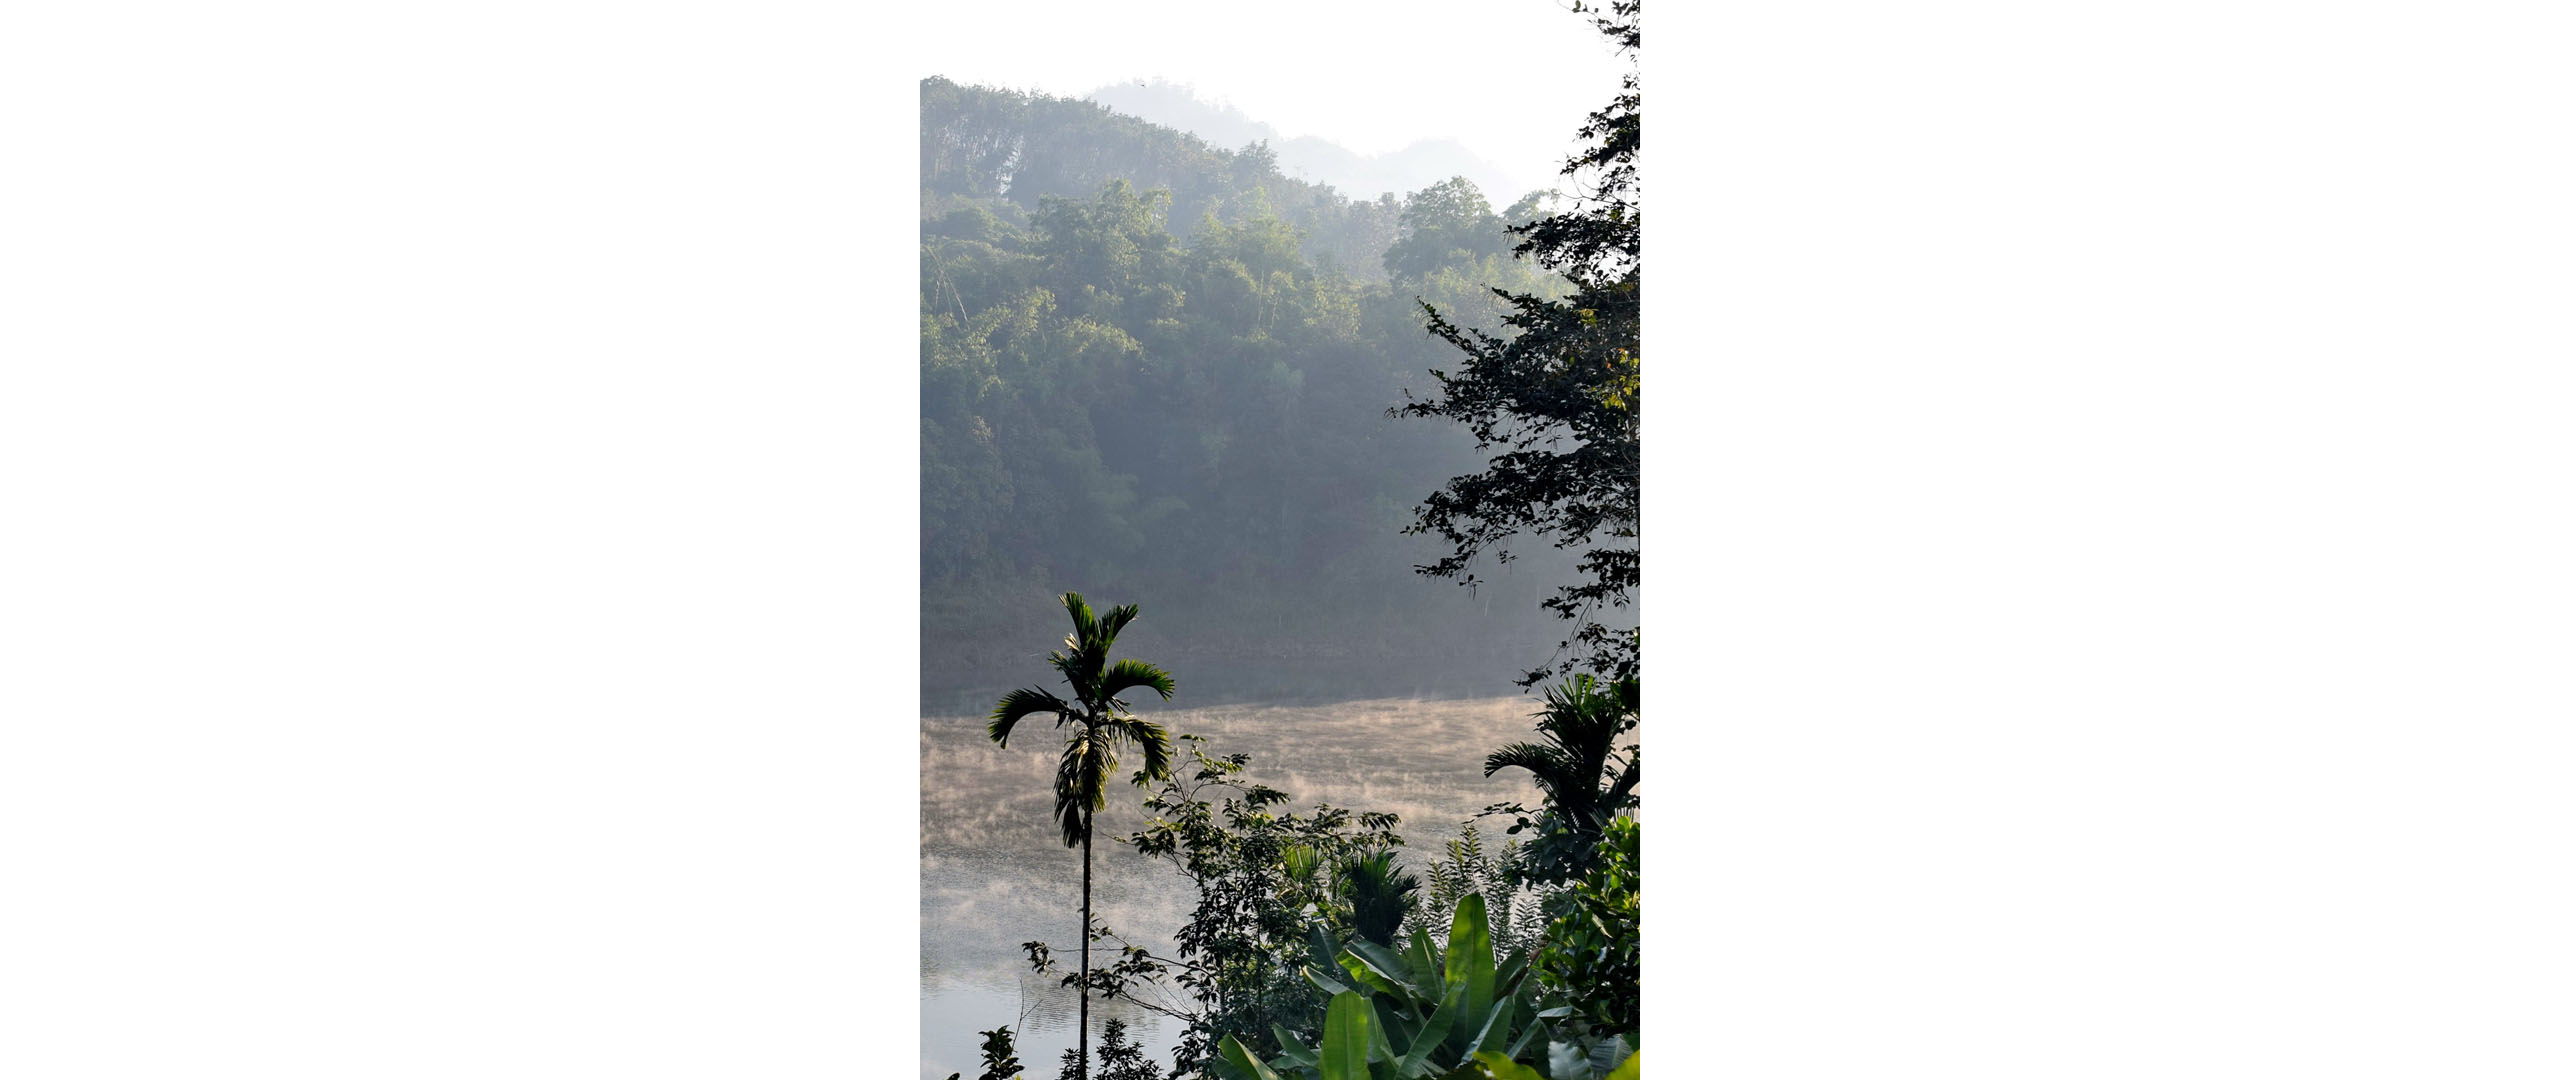 View of the hill forest, water & mist; December 2019